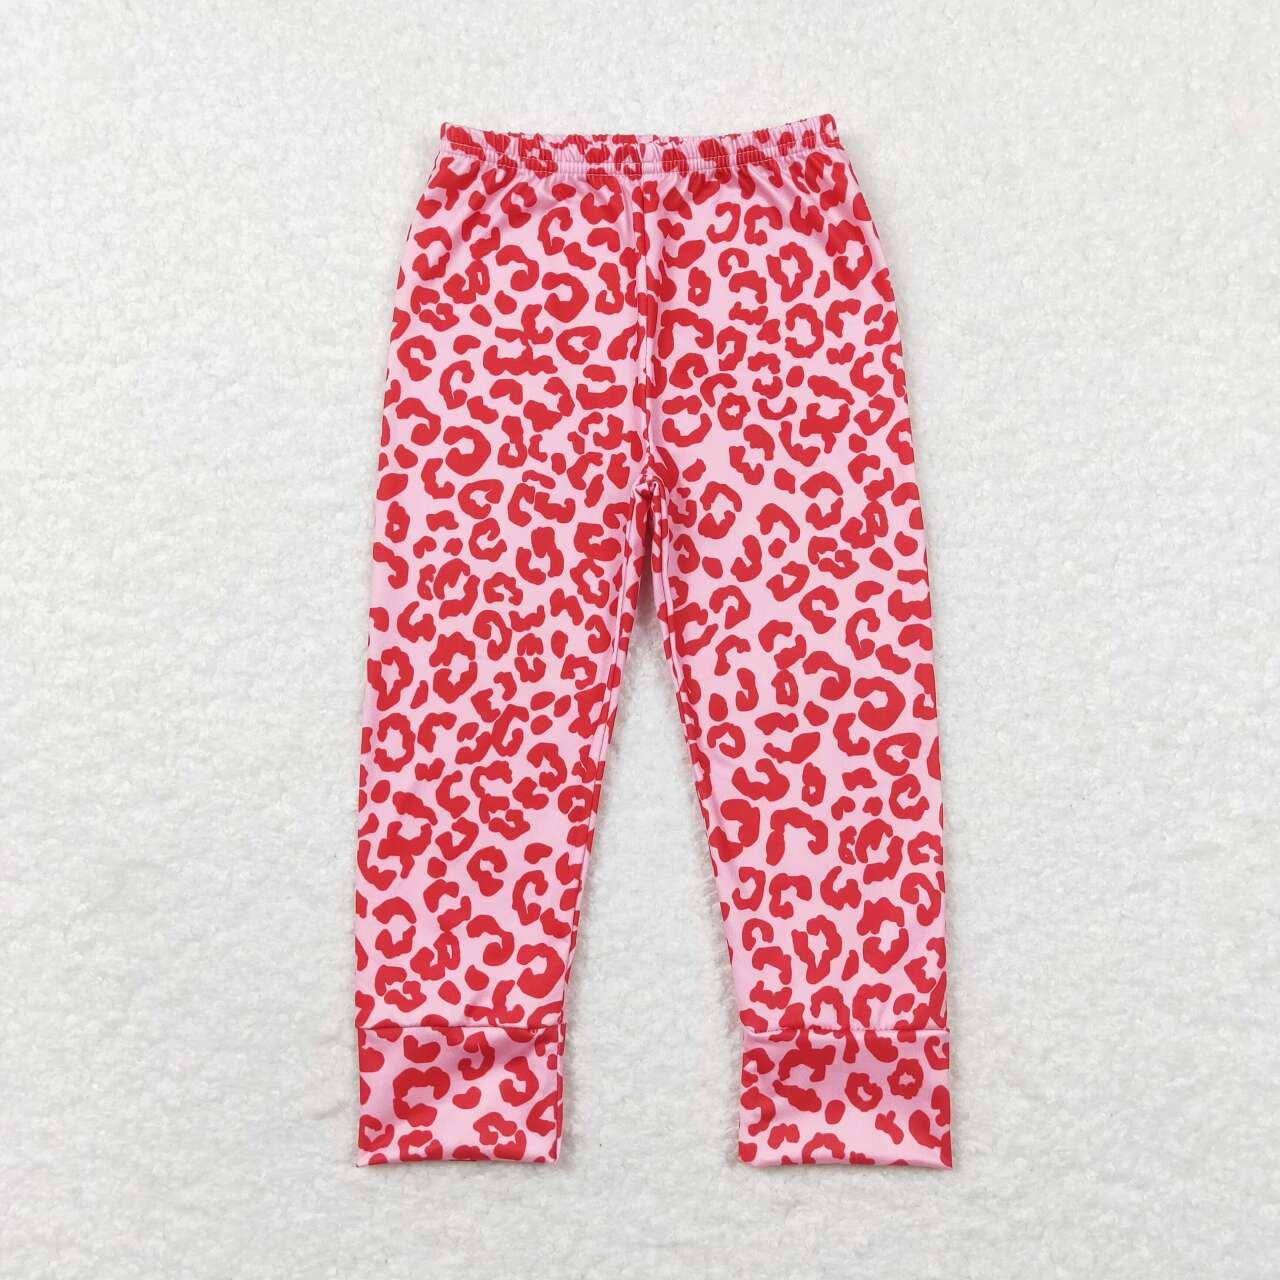 GLP1093 Red Pink Leopard Print Girls Clothes Set